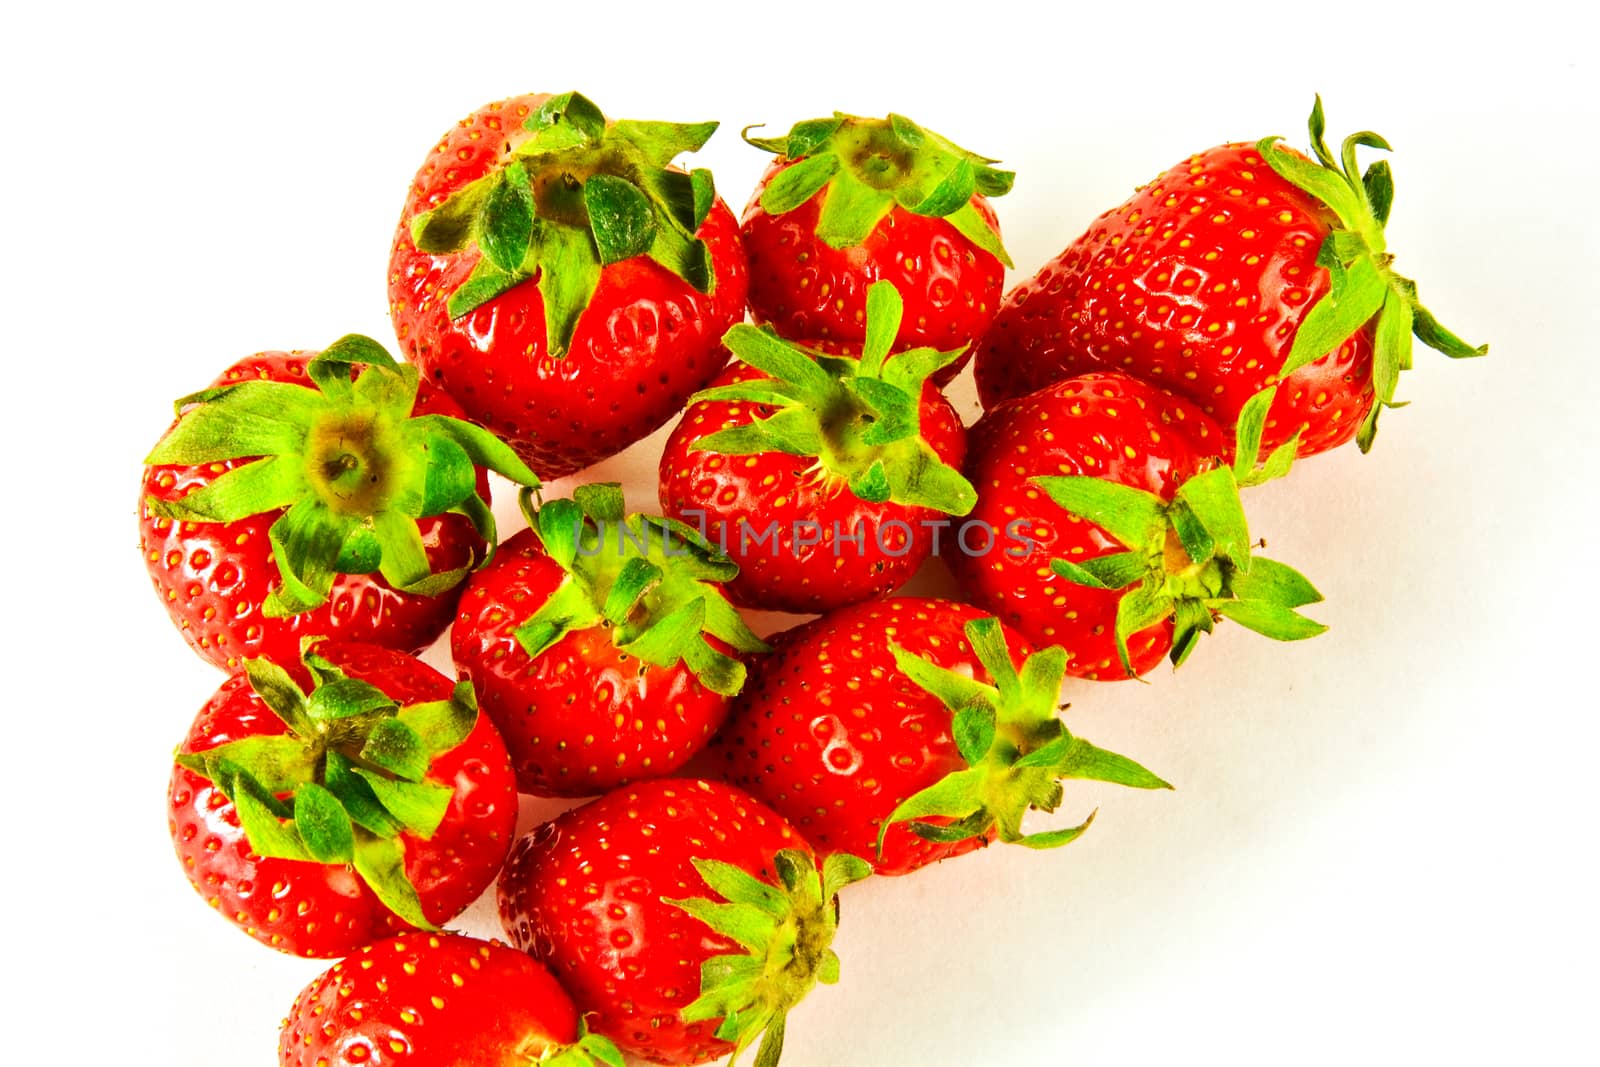 Berries are large and ripe strawberry on a white background

